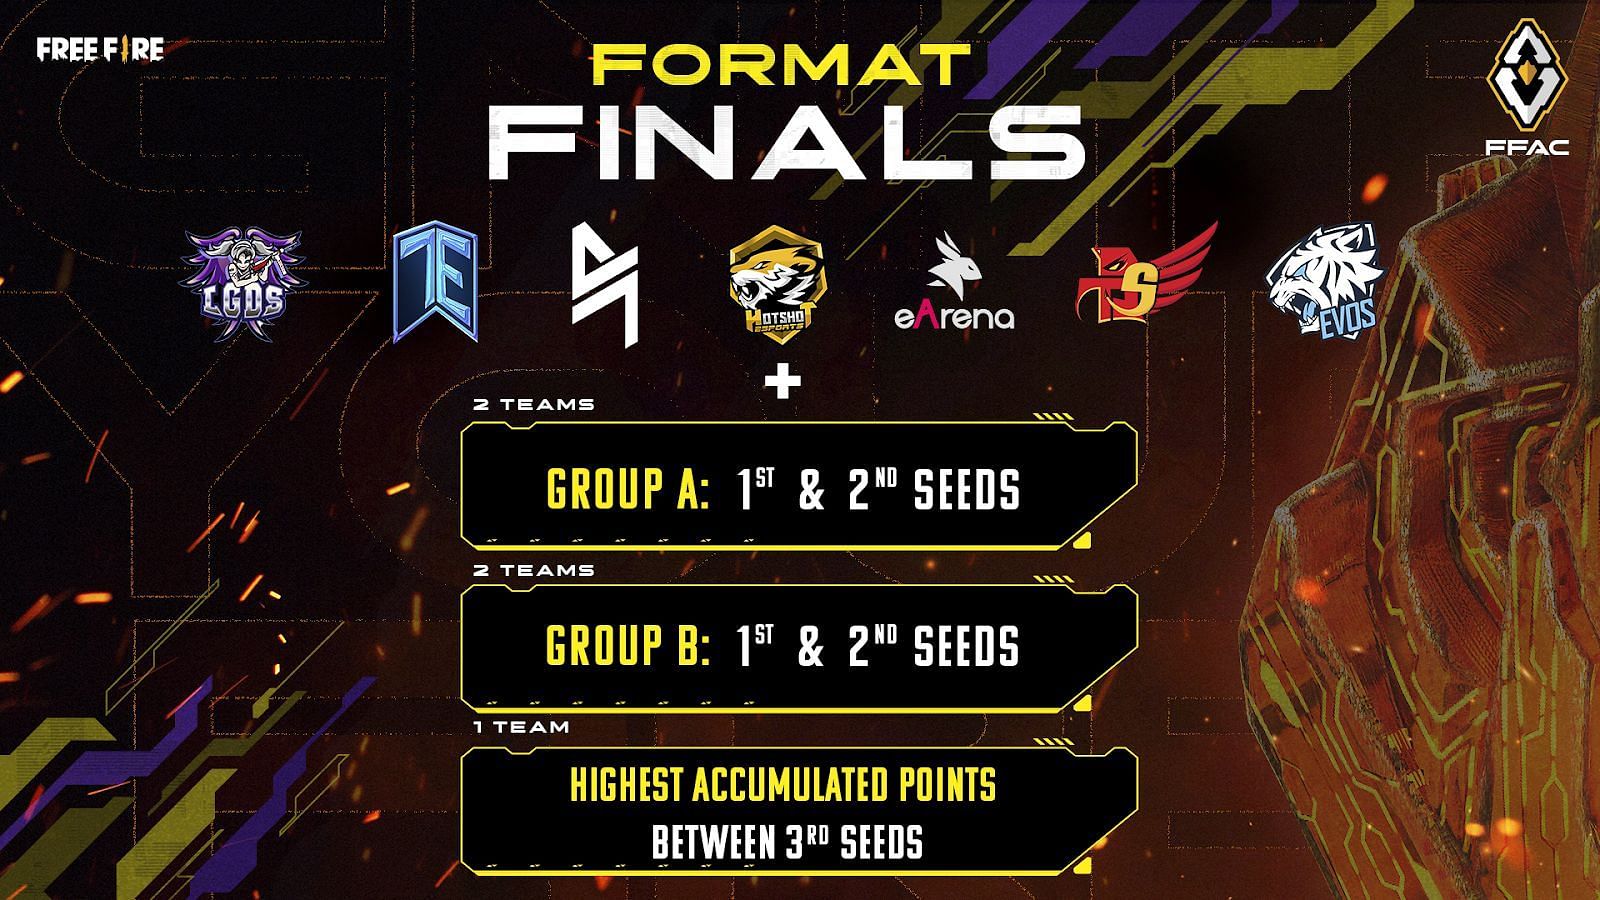 Freefire Format Finals List Groups A and B